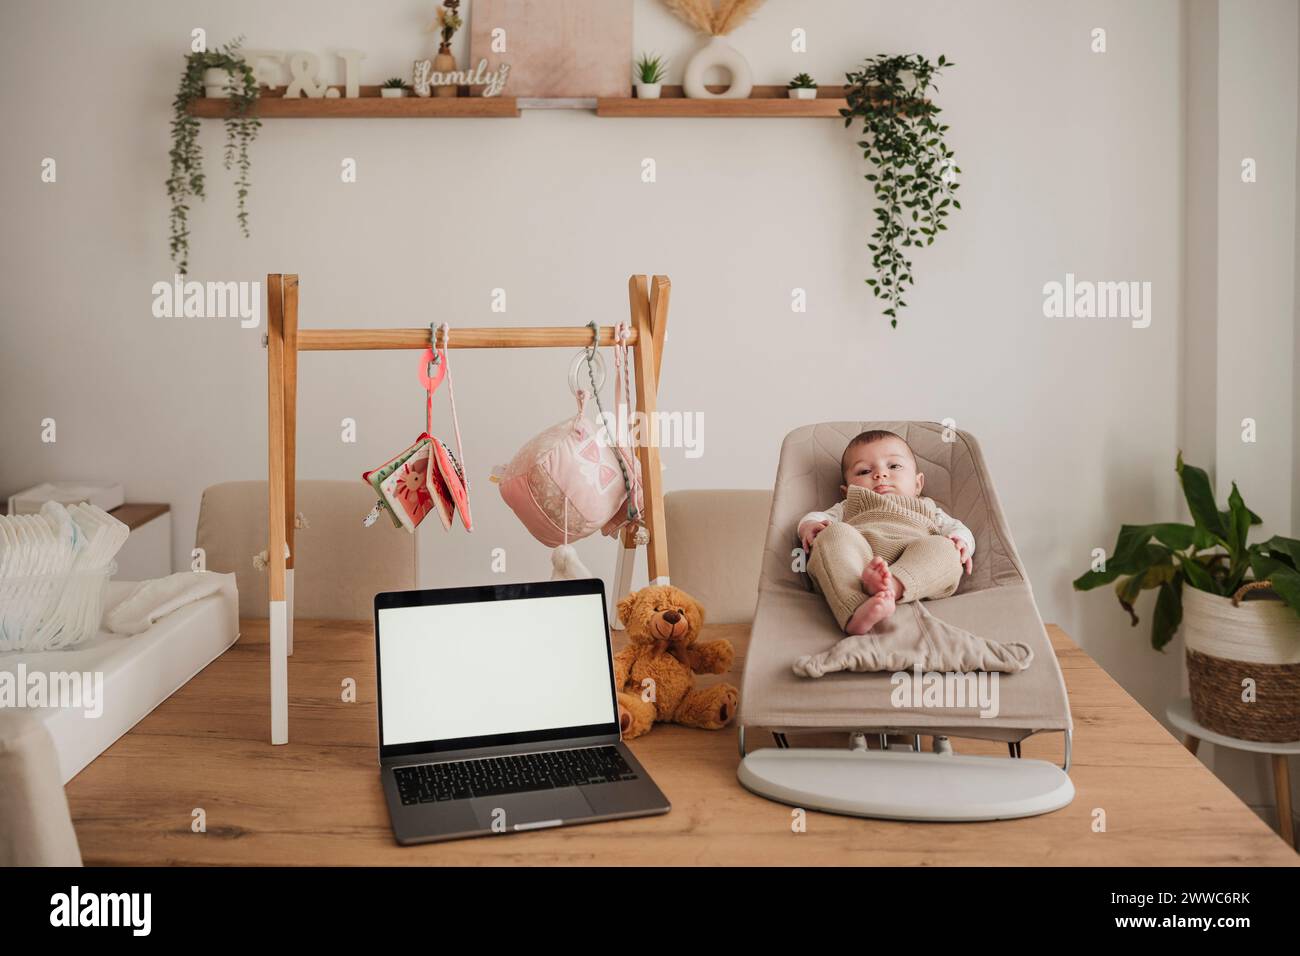 Baby girl sitting on bouncer chair near laptop at home Stock Photo